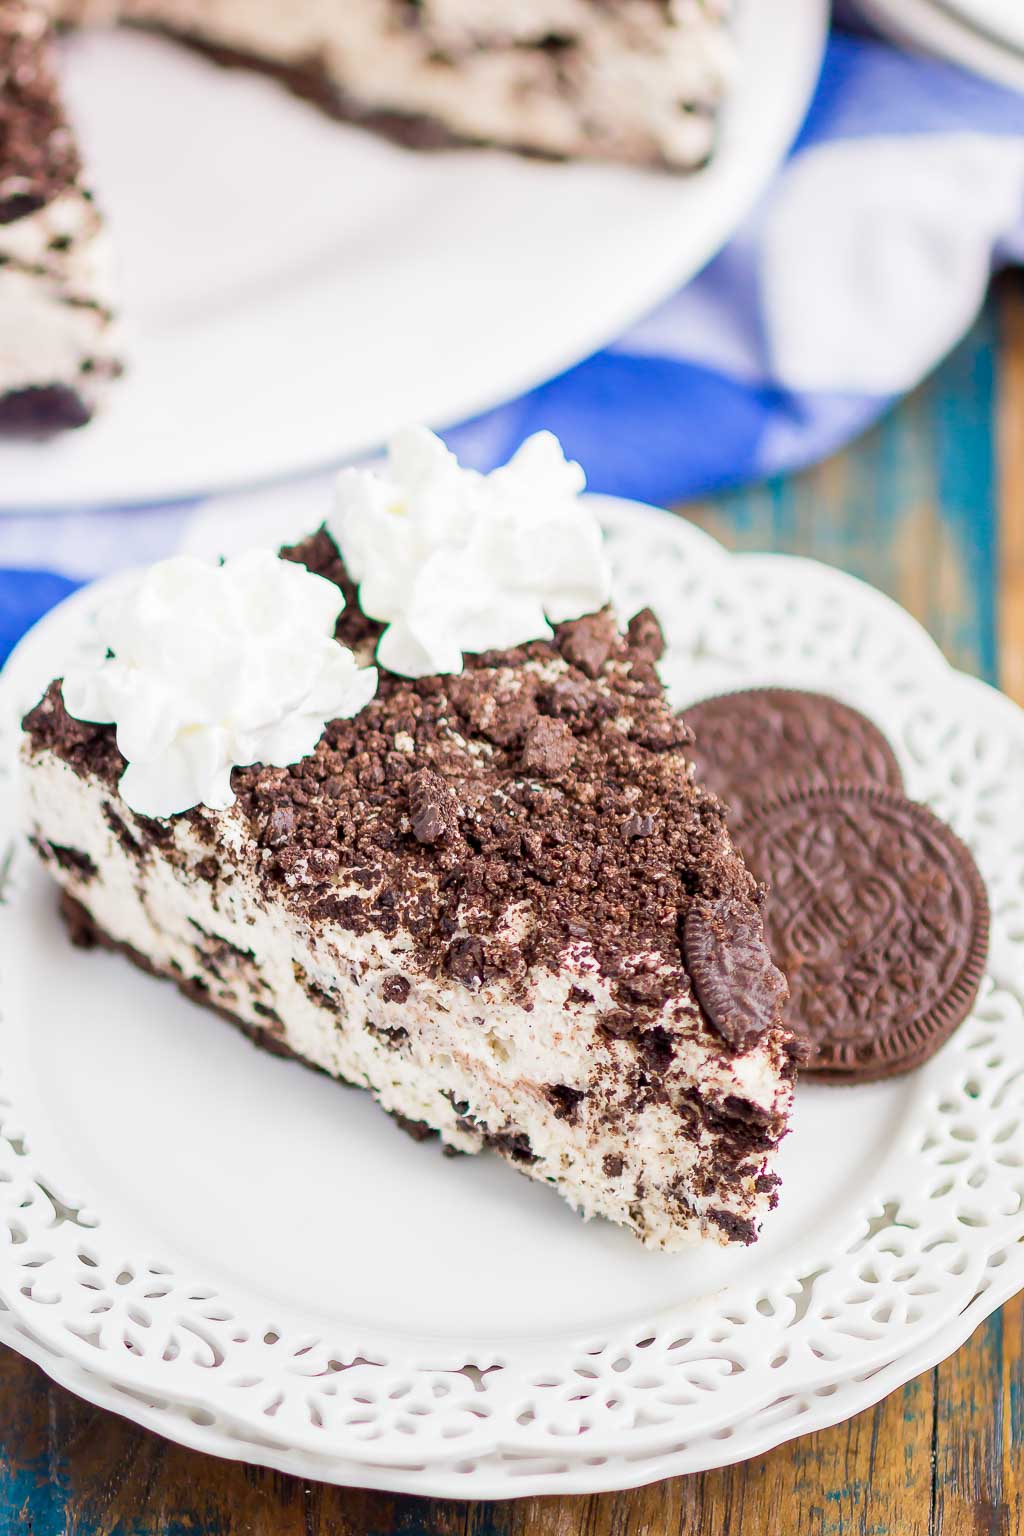 No Bake Oreo Cheesecake is an easy dessert made with a sweet Oreo crust. With no oven required and a just a few ingredients, this smooth and creamy cheesecake is perfect for Oreo lovers!